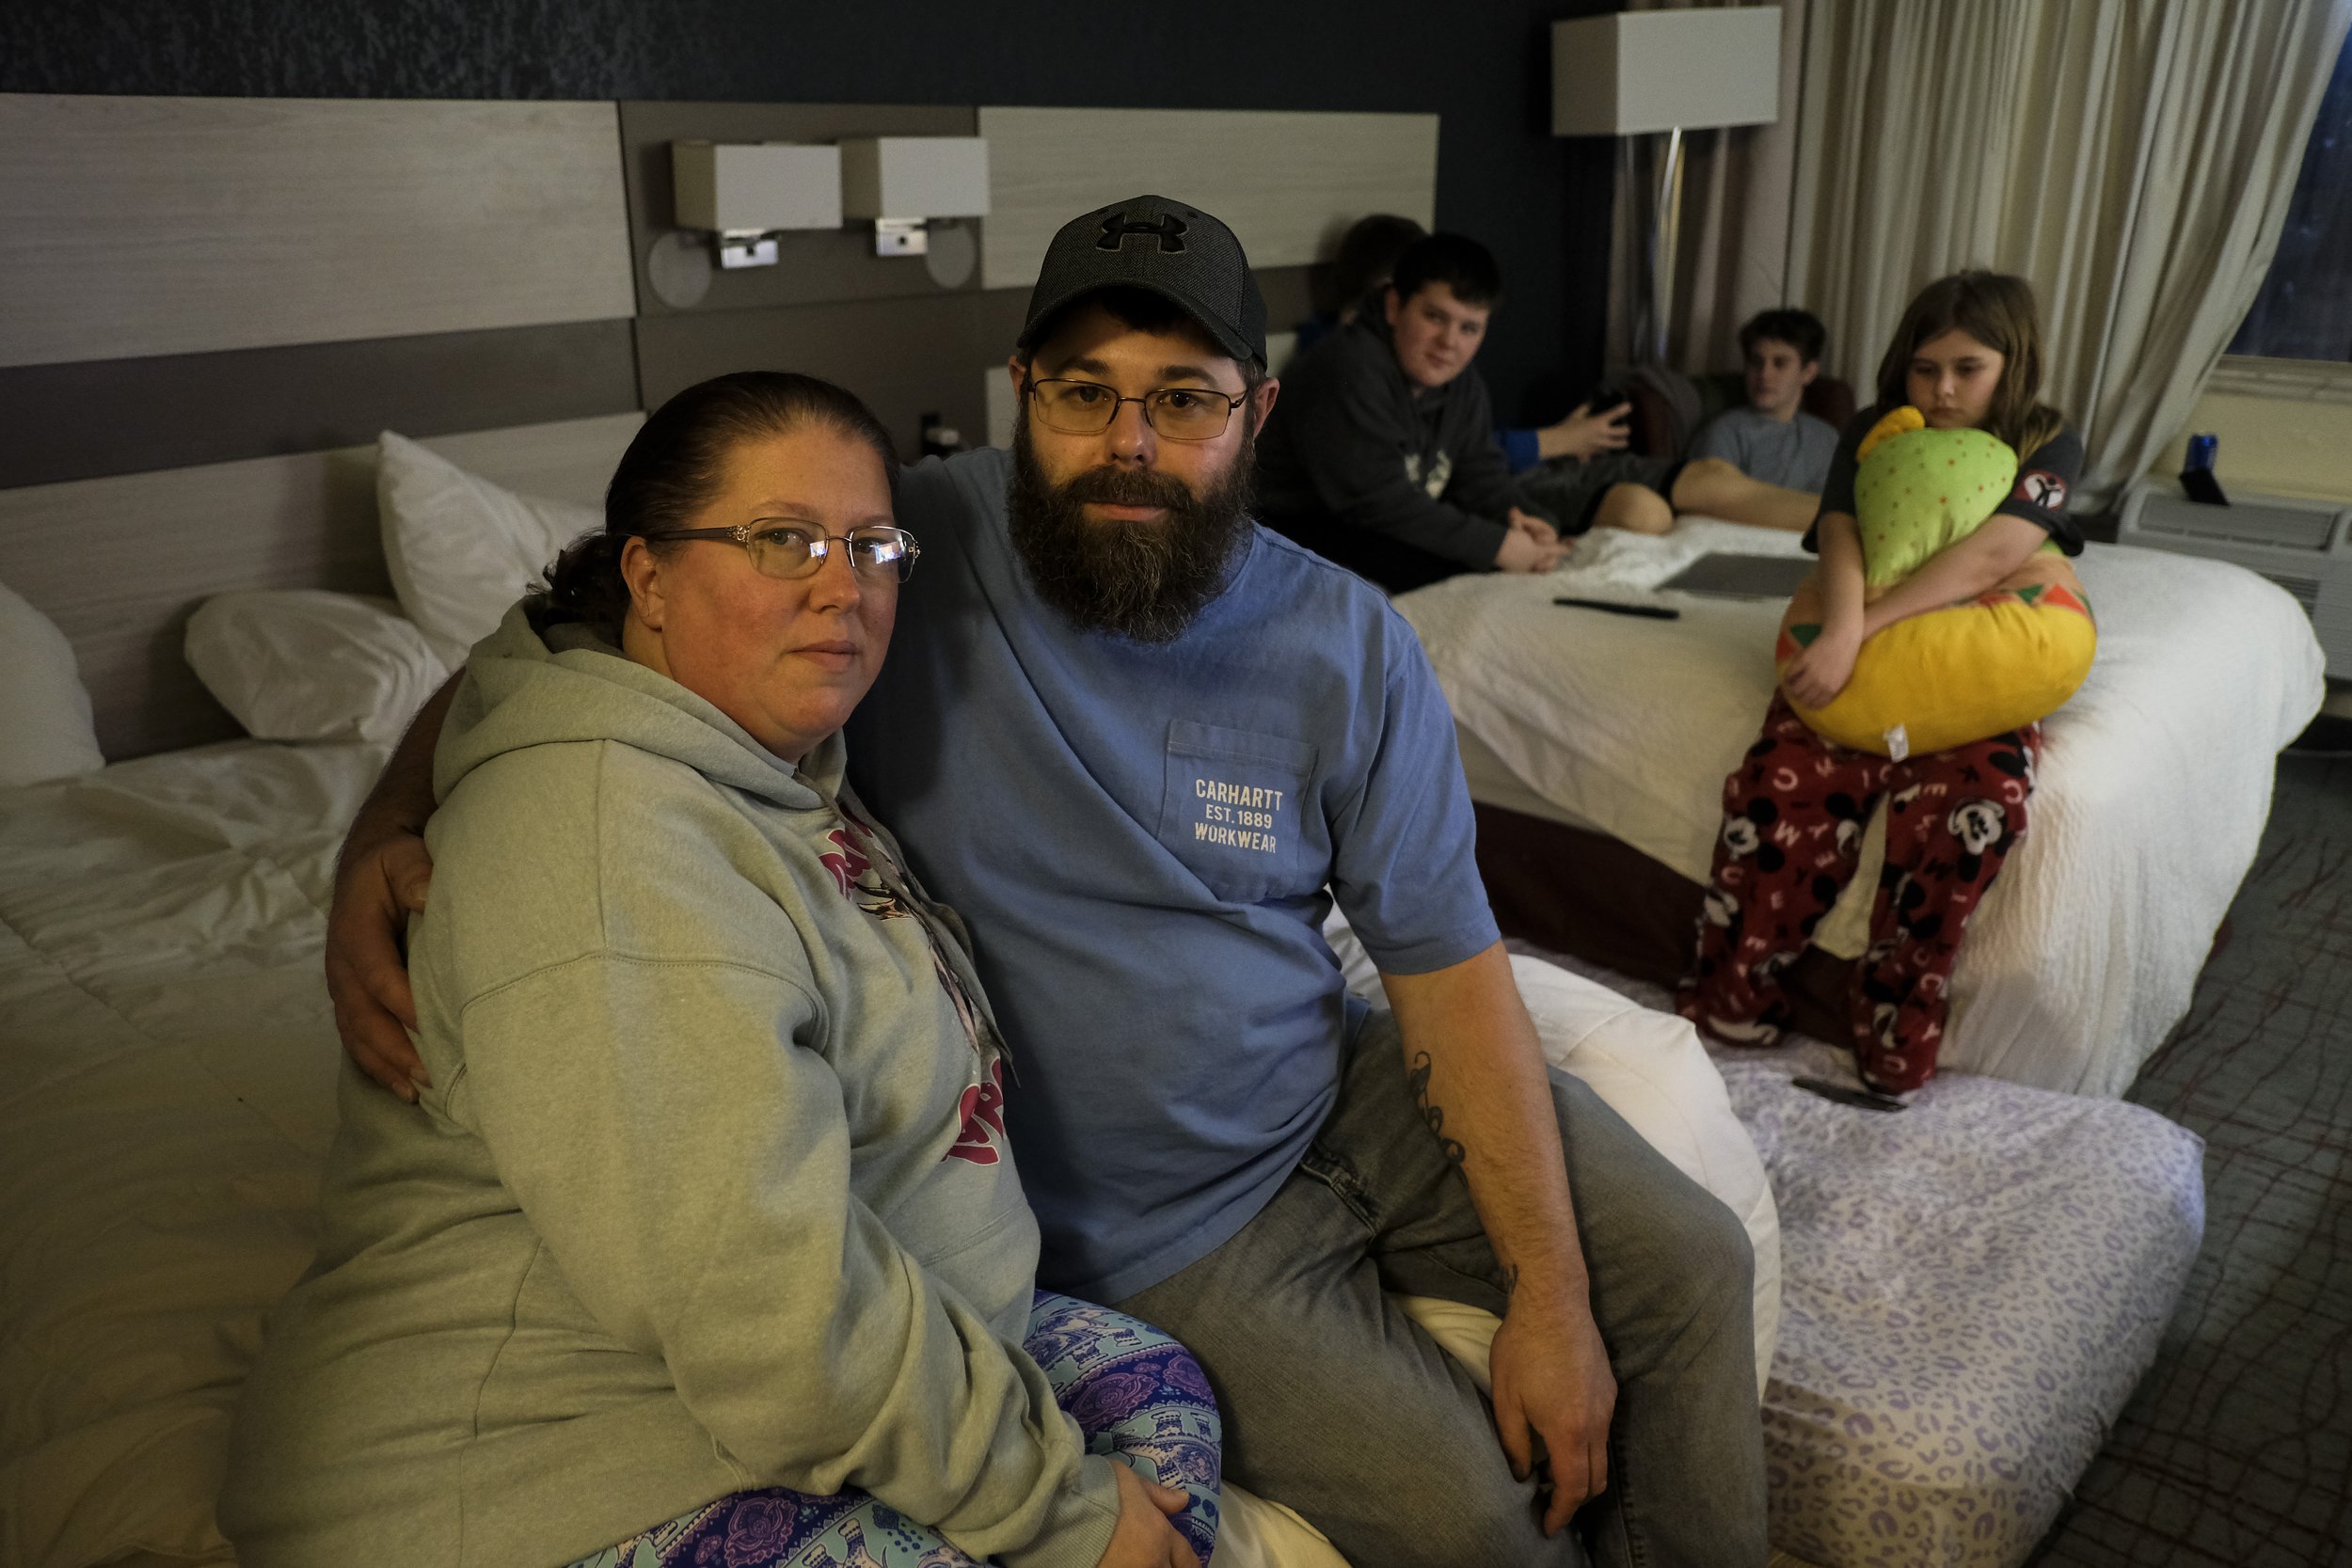  Chris Whittenberger and his partner Nicole Bentel pose for a portrait in their hotel room in Beaver Falls, Pennsylvania on Saturday, February 18, 2023. The couple and their children have been staying in hotels since evacuating from their home in Eas